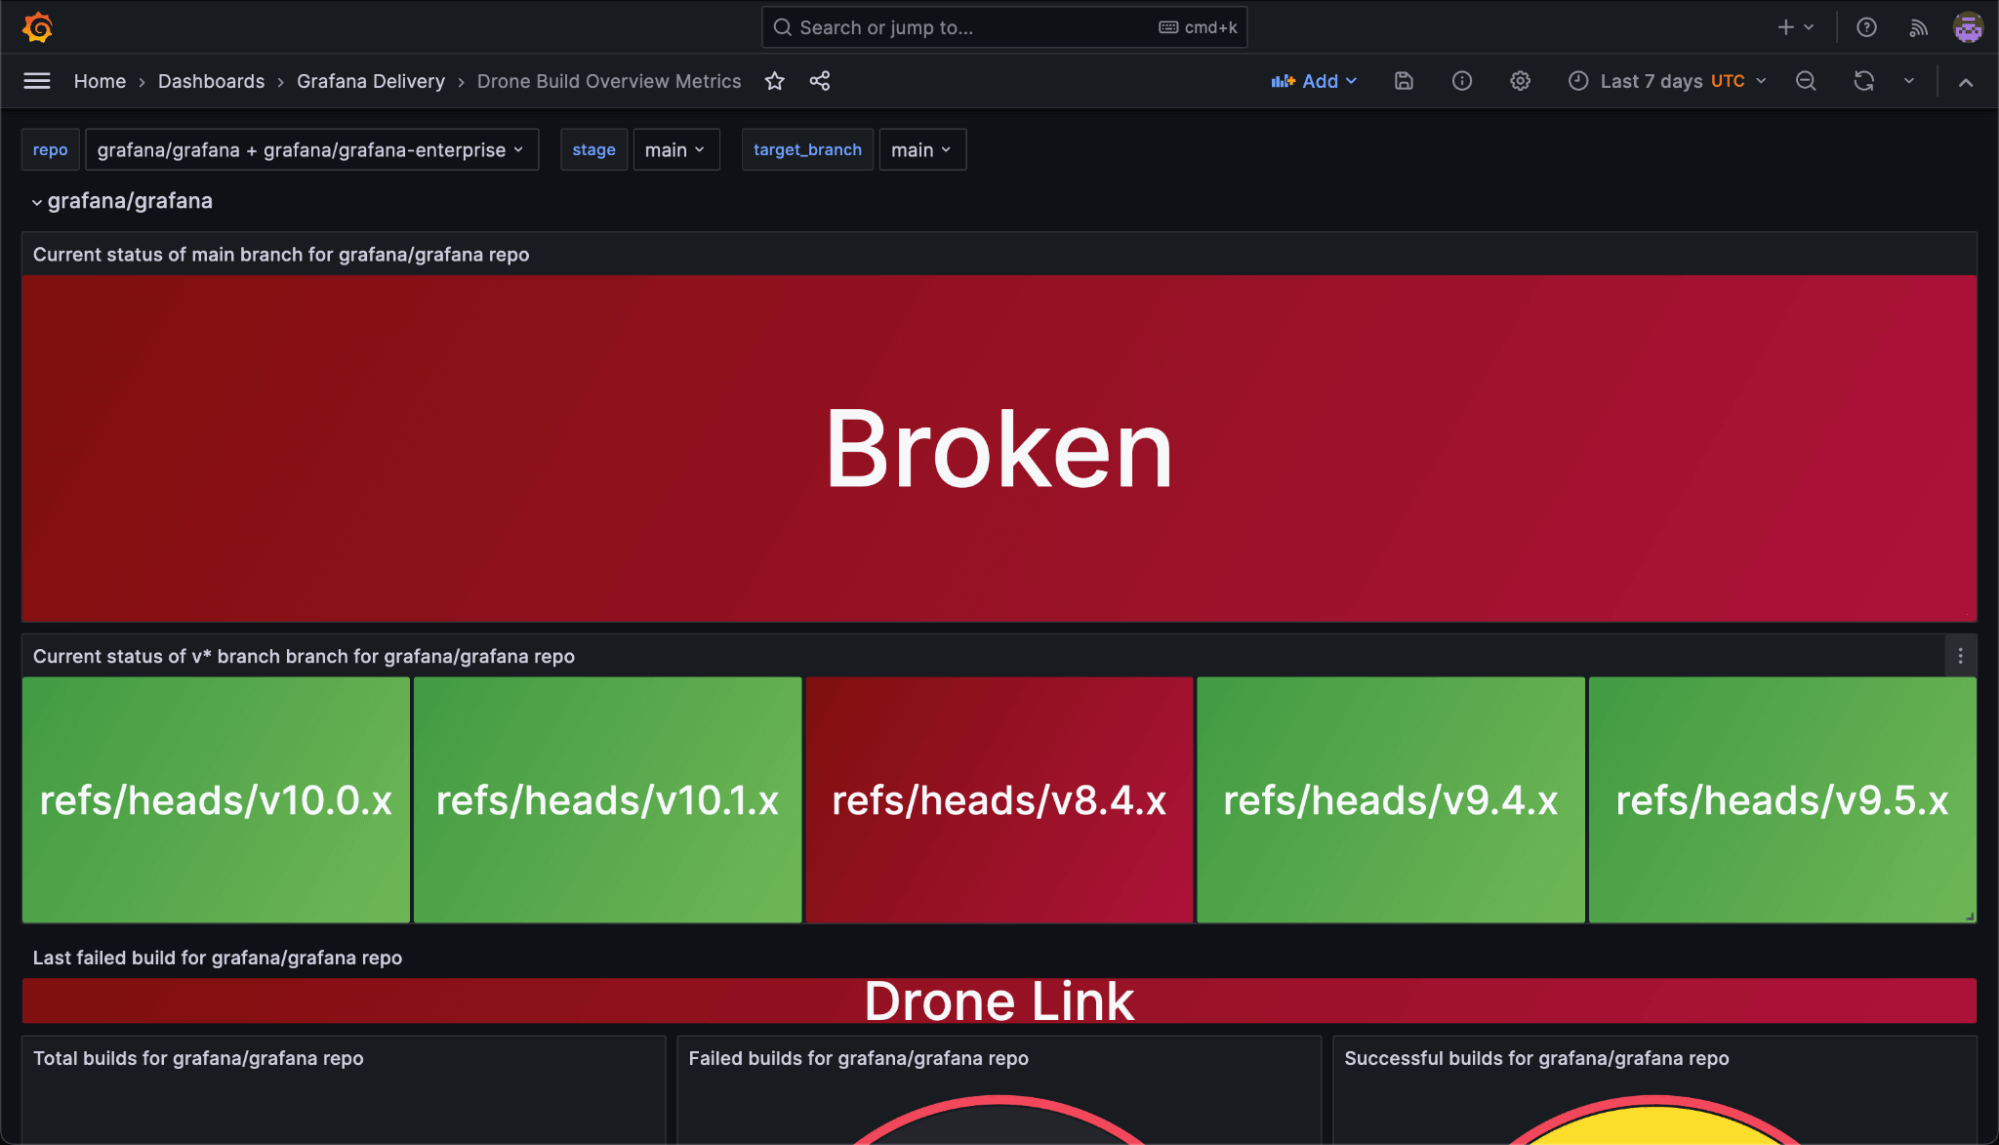 A screesnhot of a Grafana dashboard showing the current status of the main branch for the grafana/grafana repo.